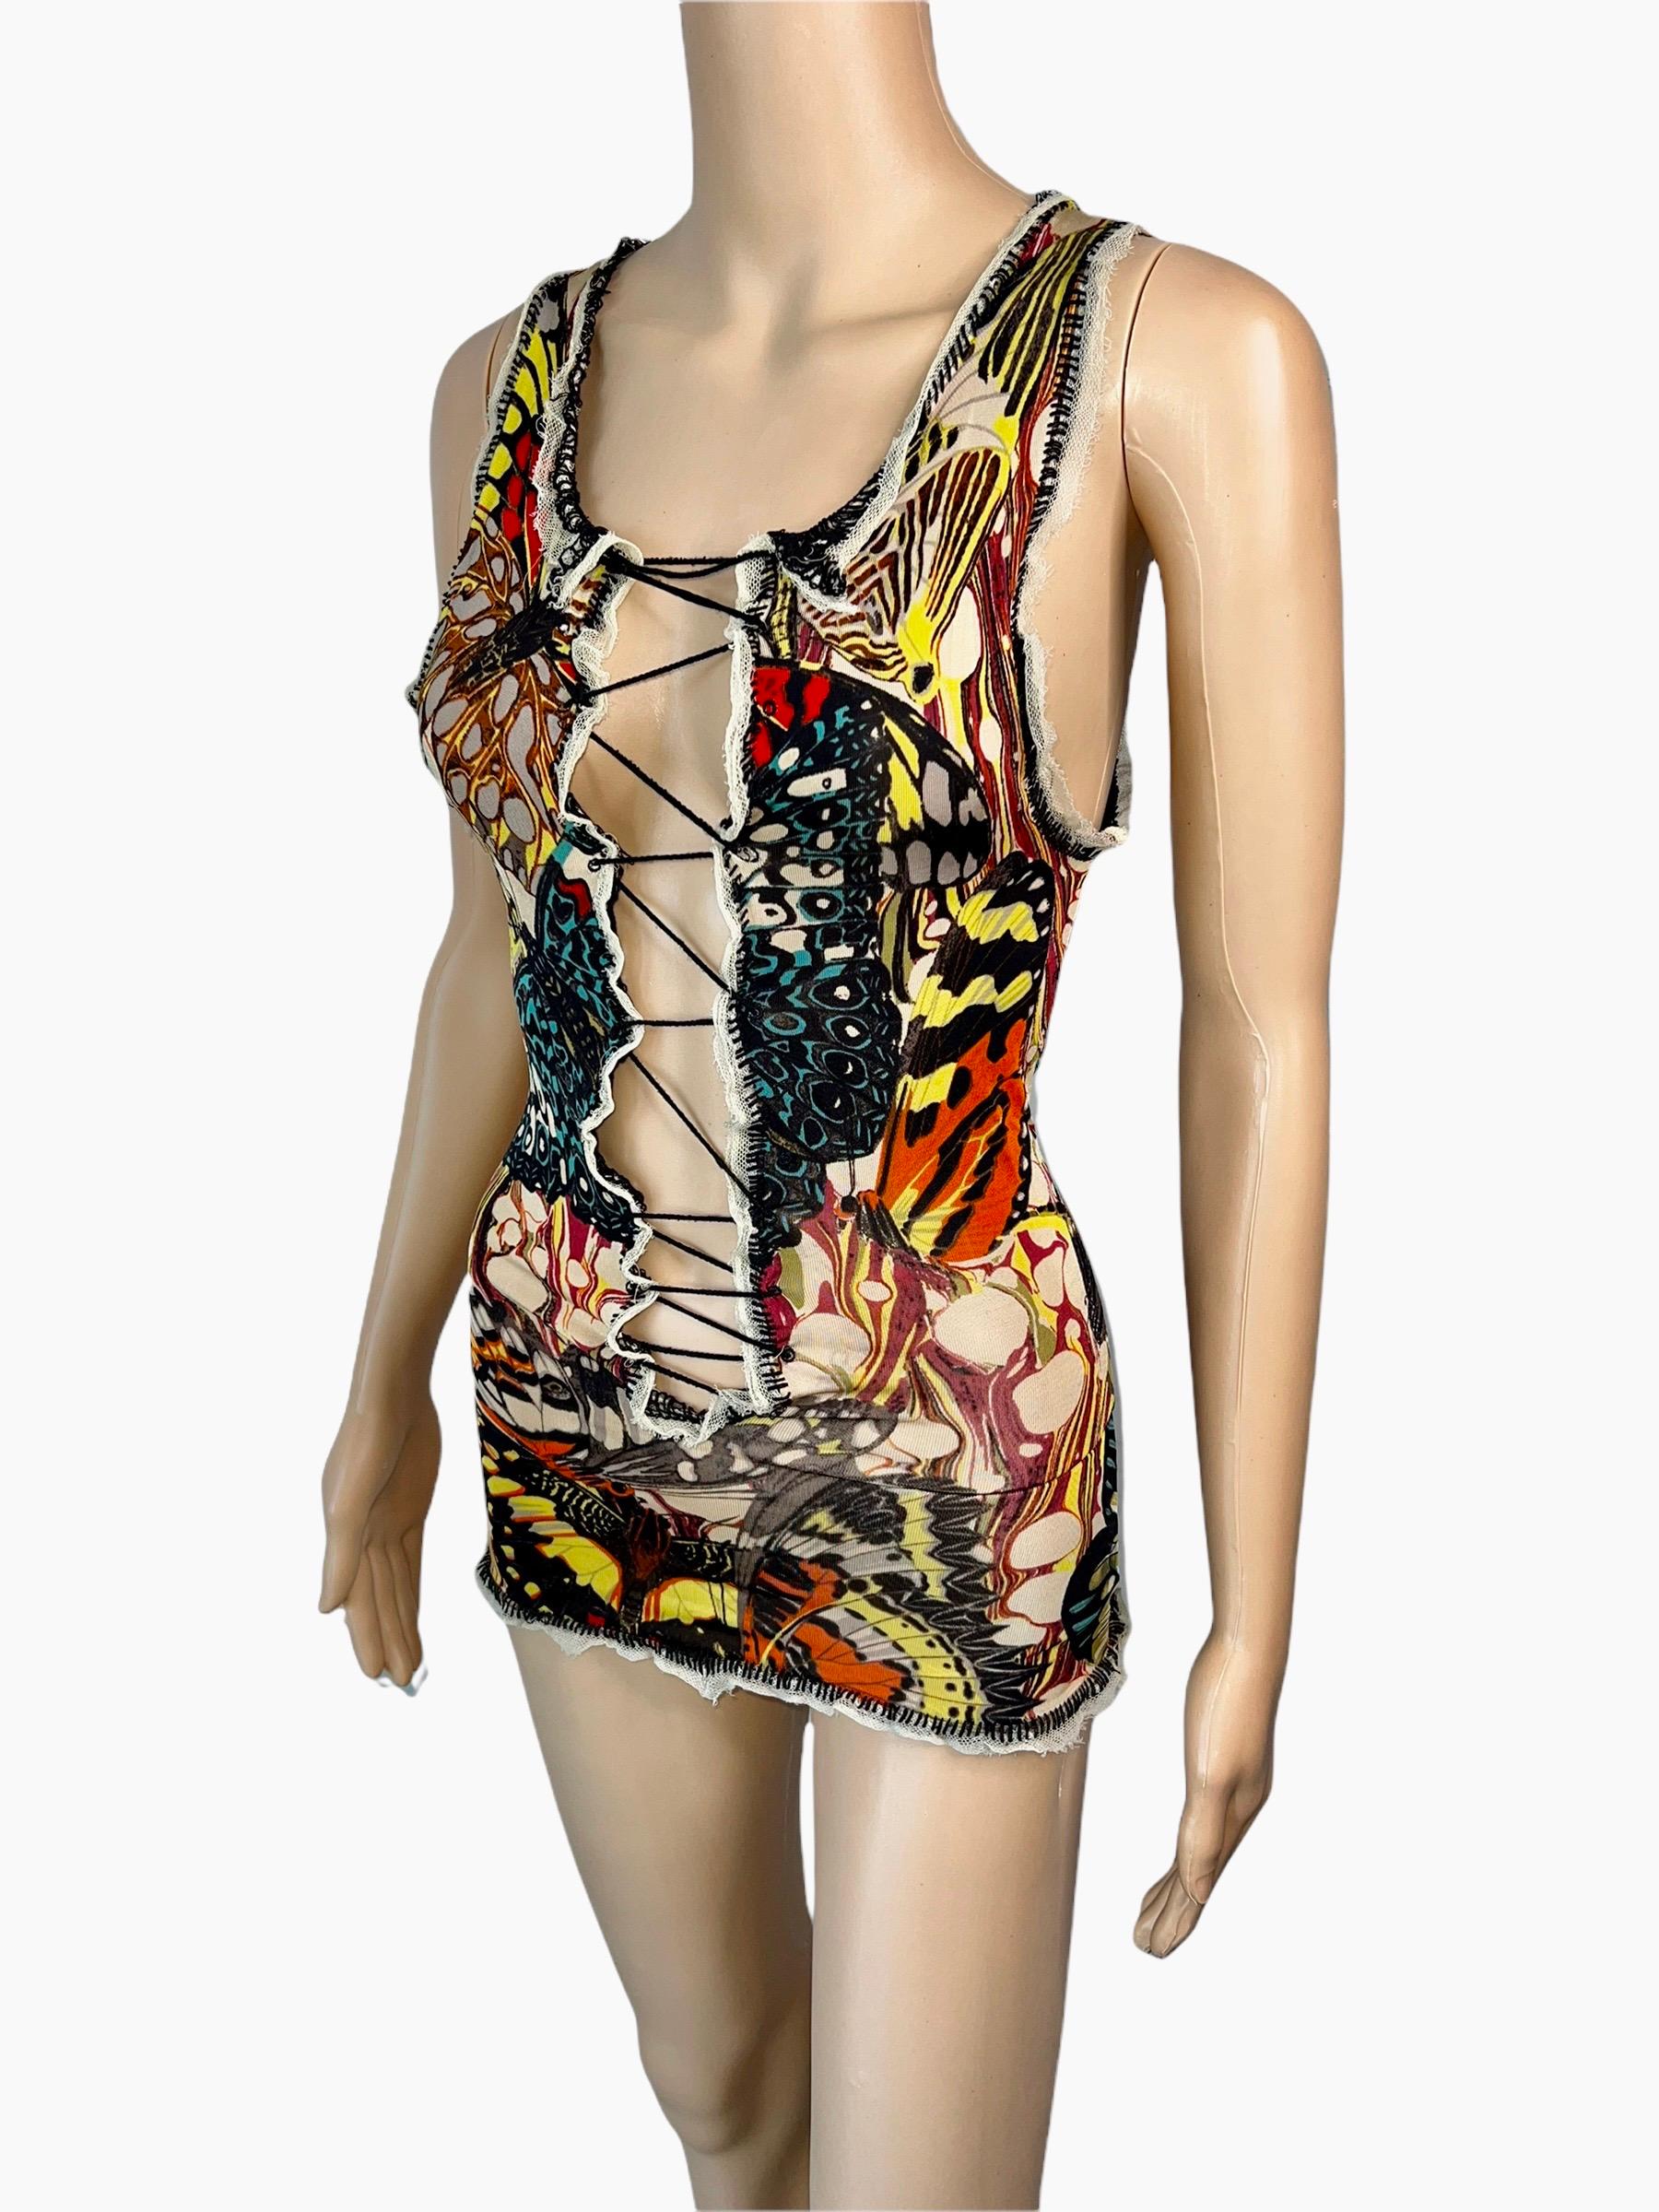 Jean Paul Gaultier S/S 2003 Plunging Neckline Butterfly Print Lace Up Top Size L



